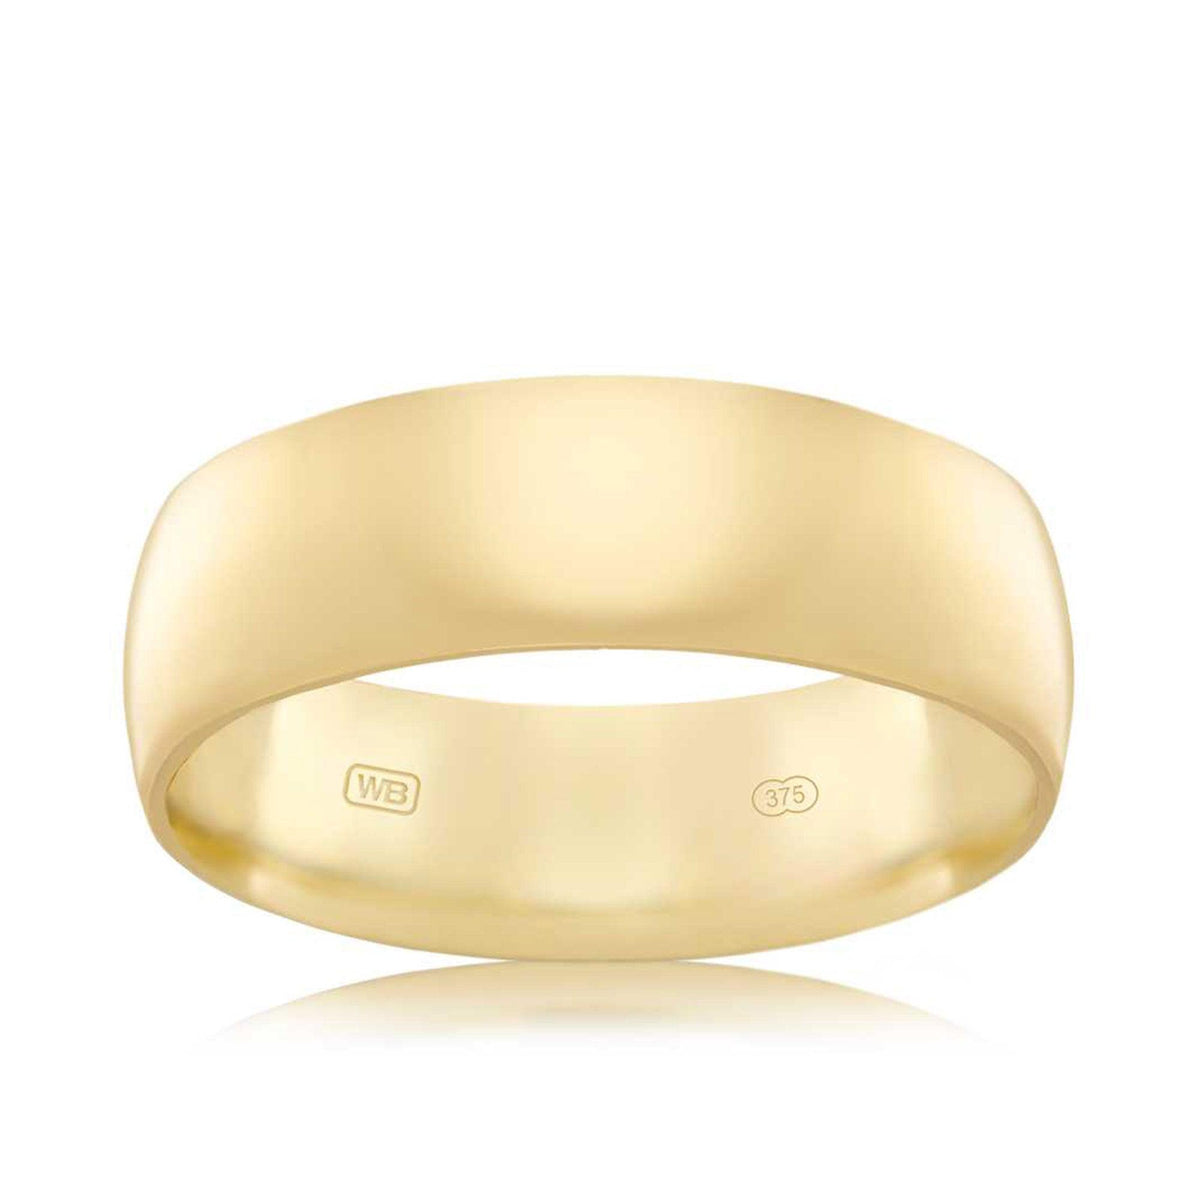 Men's Comfort Fit Wedding Band in 9ct Yellow Gold - Wallace Bishop